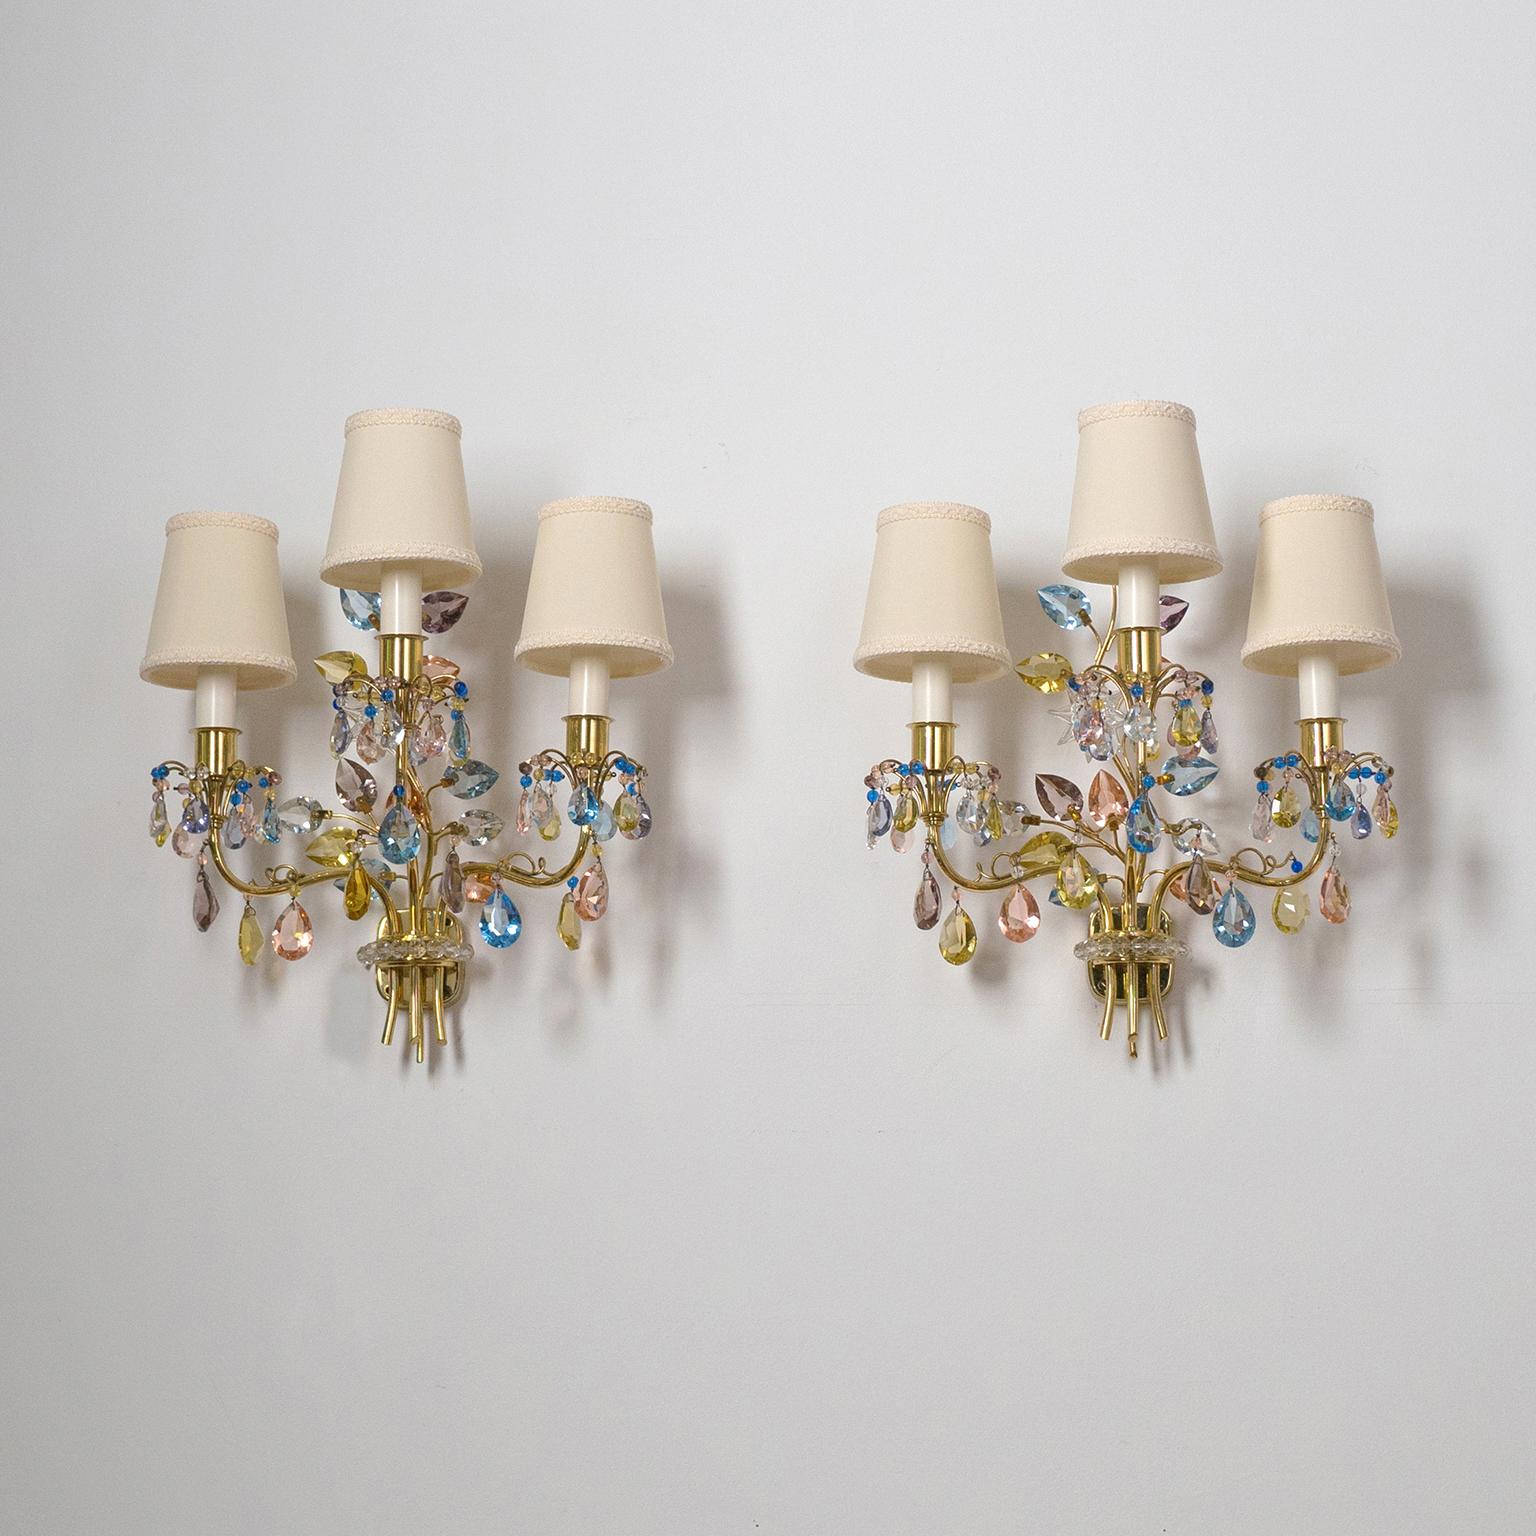 Rare pair of three-arm brass wall lights with colored crystals designed by Oswald Haerdtl for J&L Lobmeyr, 1950s. Intricate brass structure with crystals of varying shapes and colors. Three arms, each with an E14 socket and new custom shades. Priced